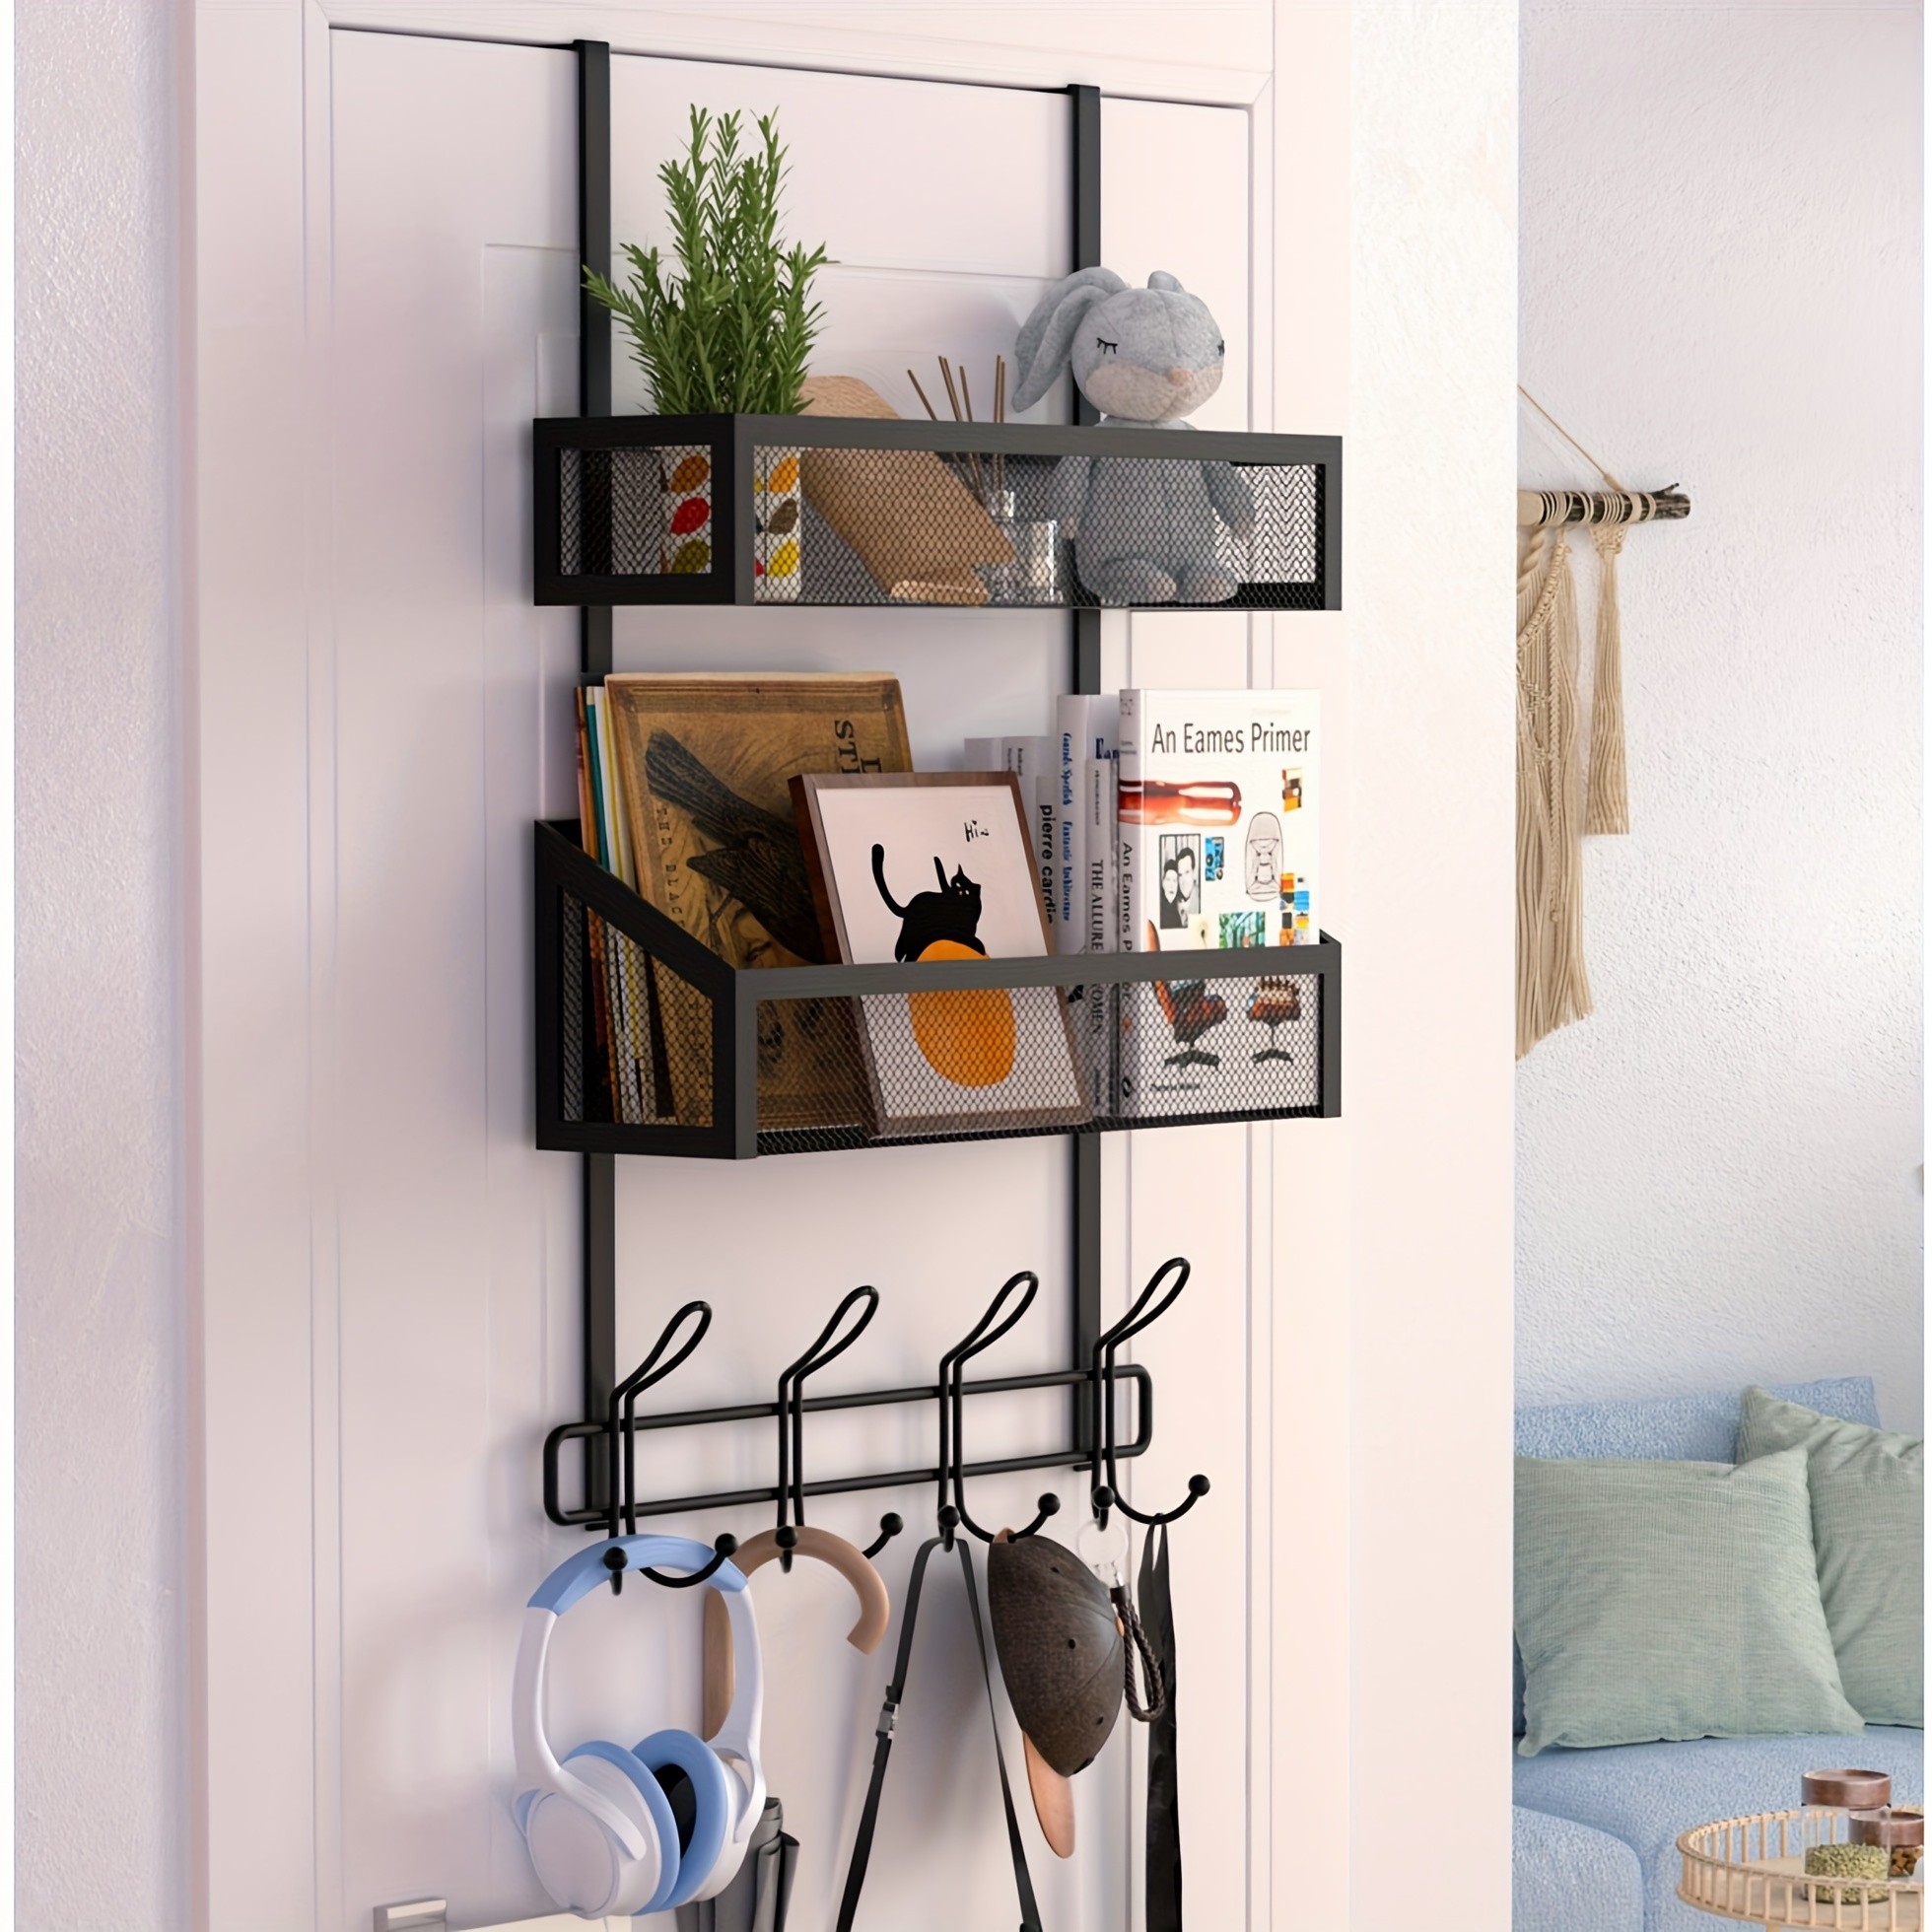 

Over-the-door Storage Rack With 12 Hooks - Metal Hanging Mount Organizer With Powder Coated Finish, Adjustable And Rust Resistant, Easy To Install For Bathroom, Bedroom, Kitchen, Office